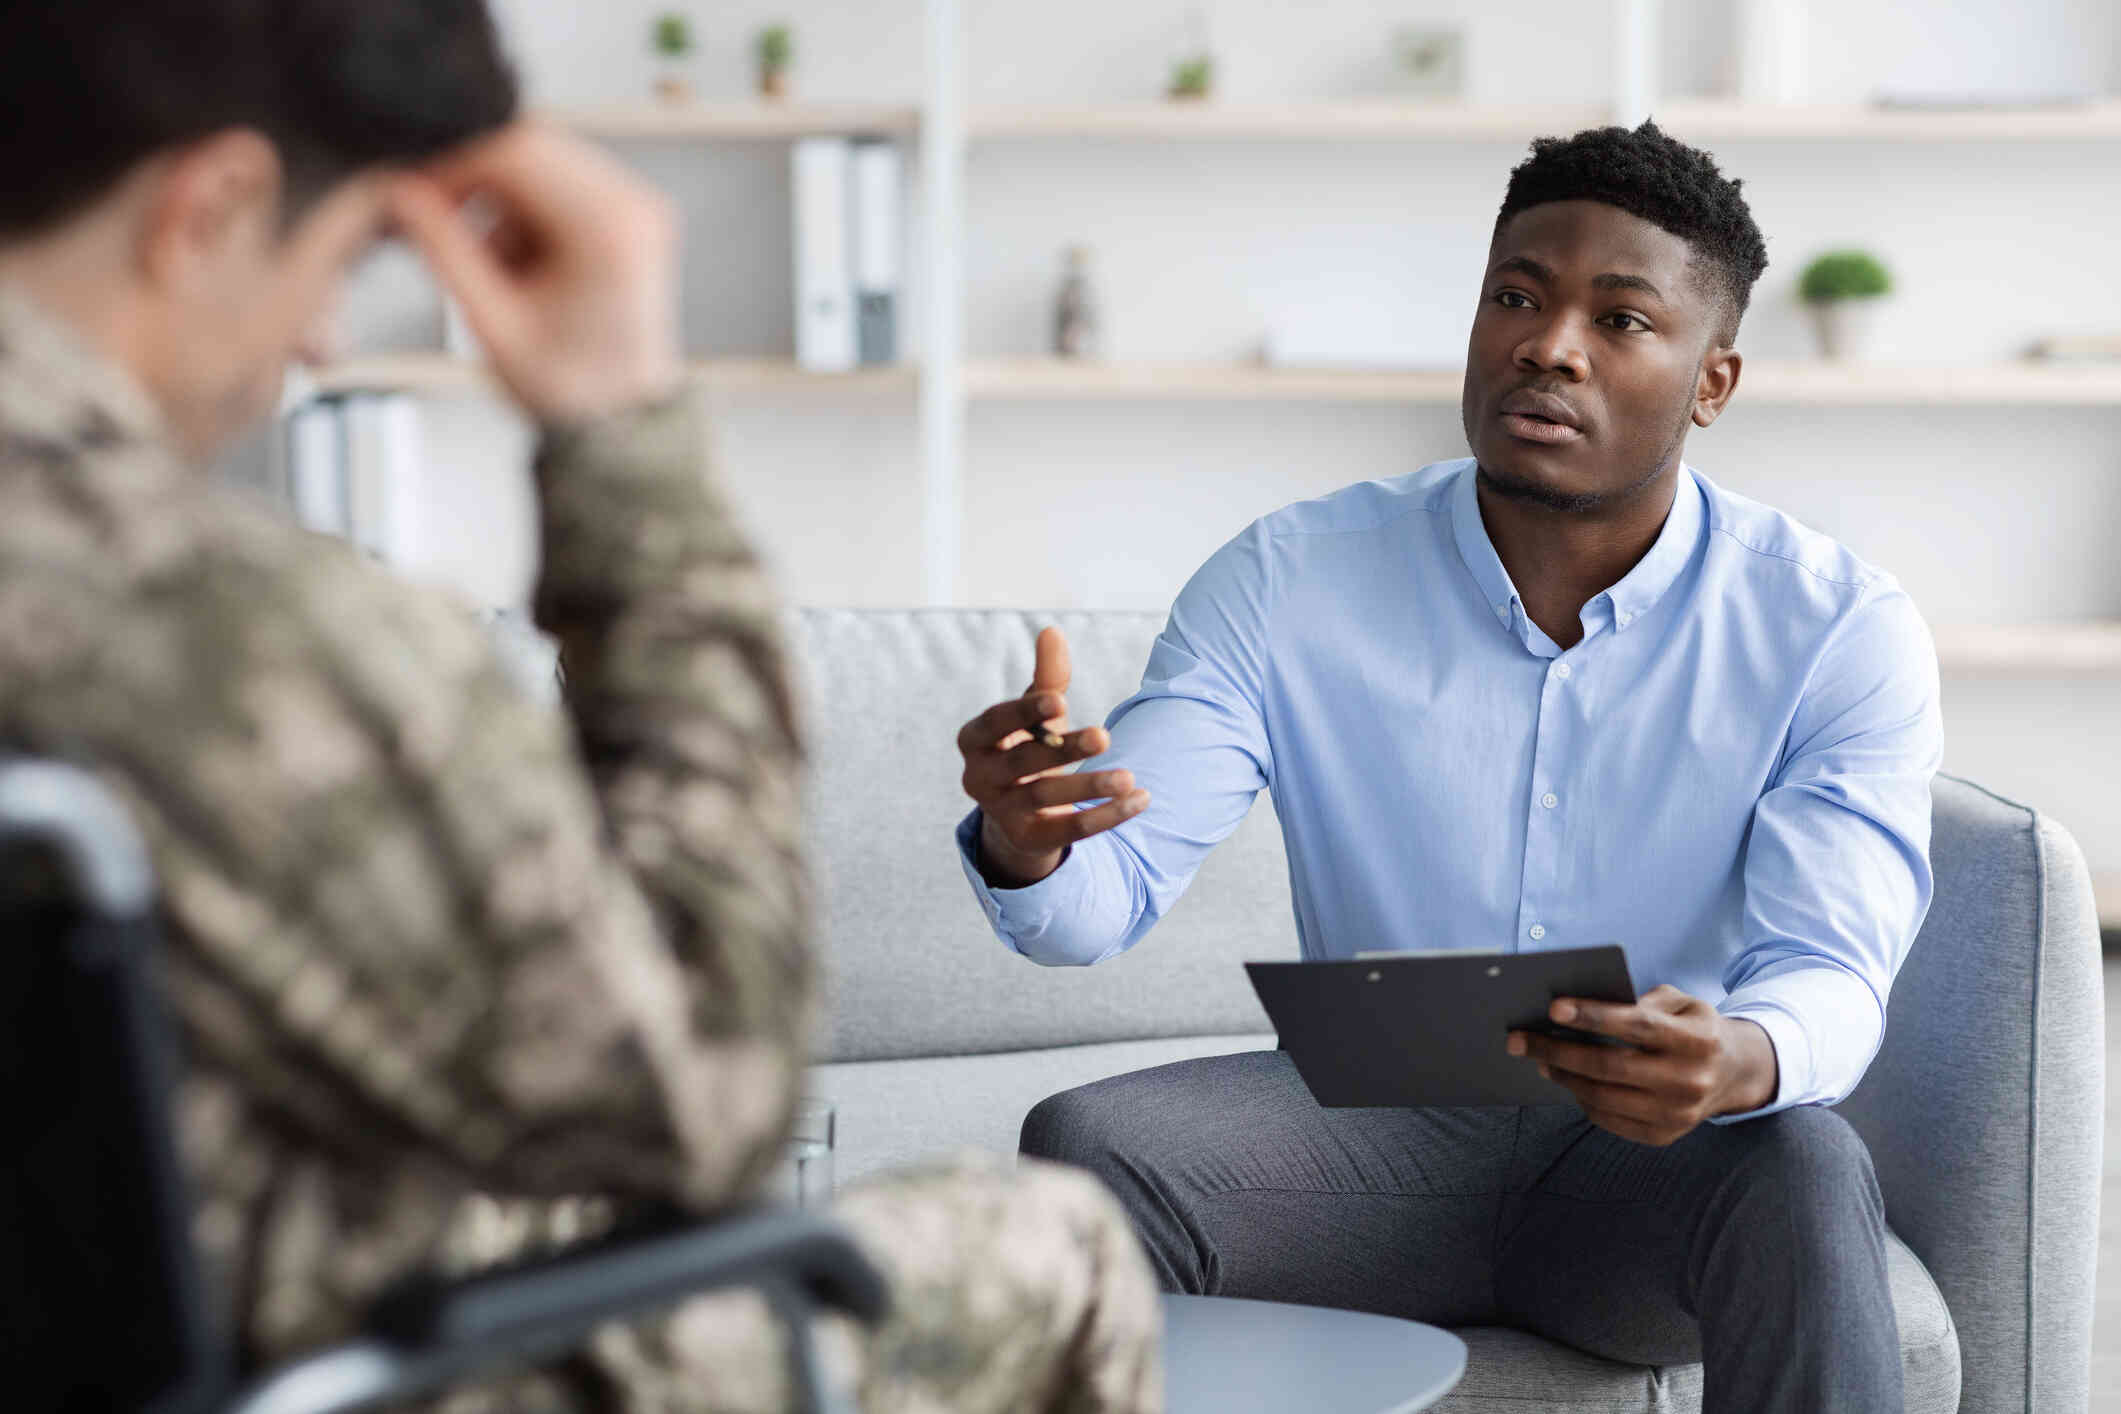 A male therapist holds a clipboard while talking to the patient in a military uniform sitting across from him during a therapy session.